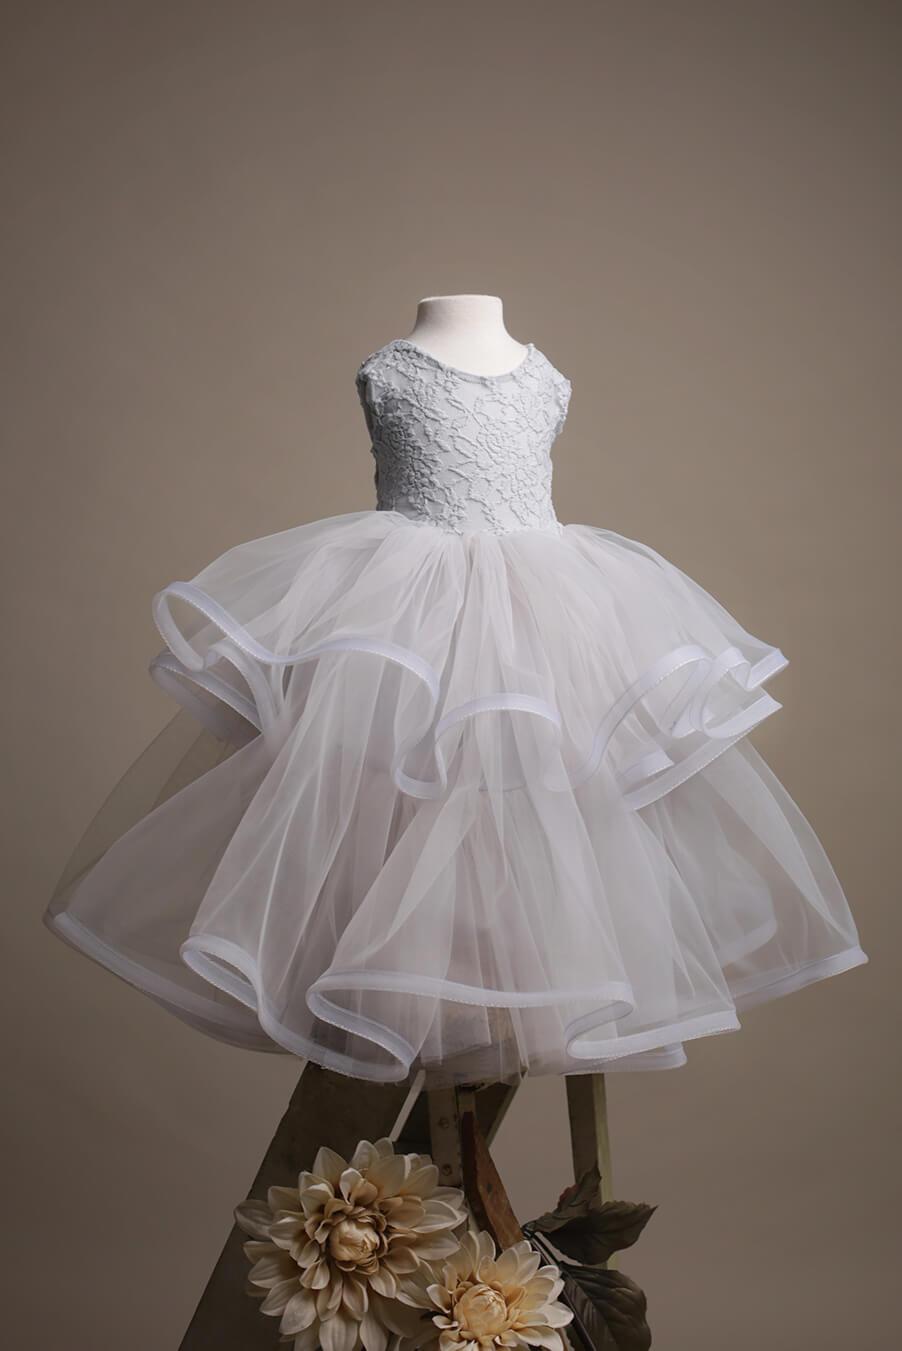 A photo of a kids dress. The top of the dress is from lace and jersey. The skirt is tulle. The dress is in the colour grey